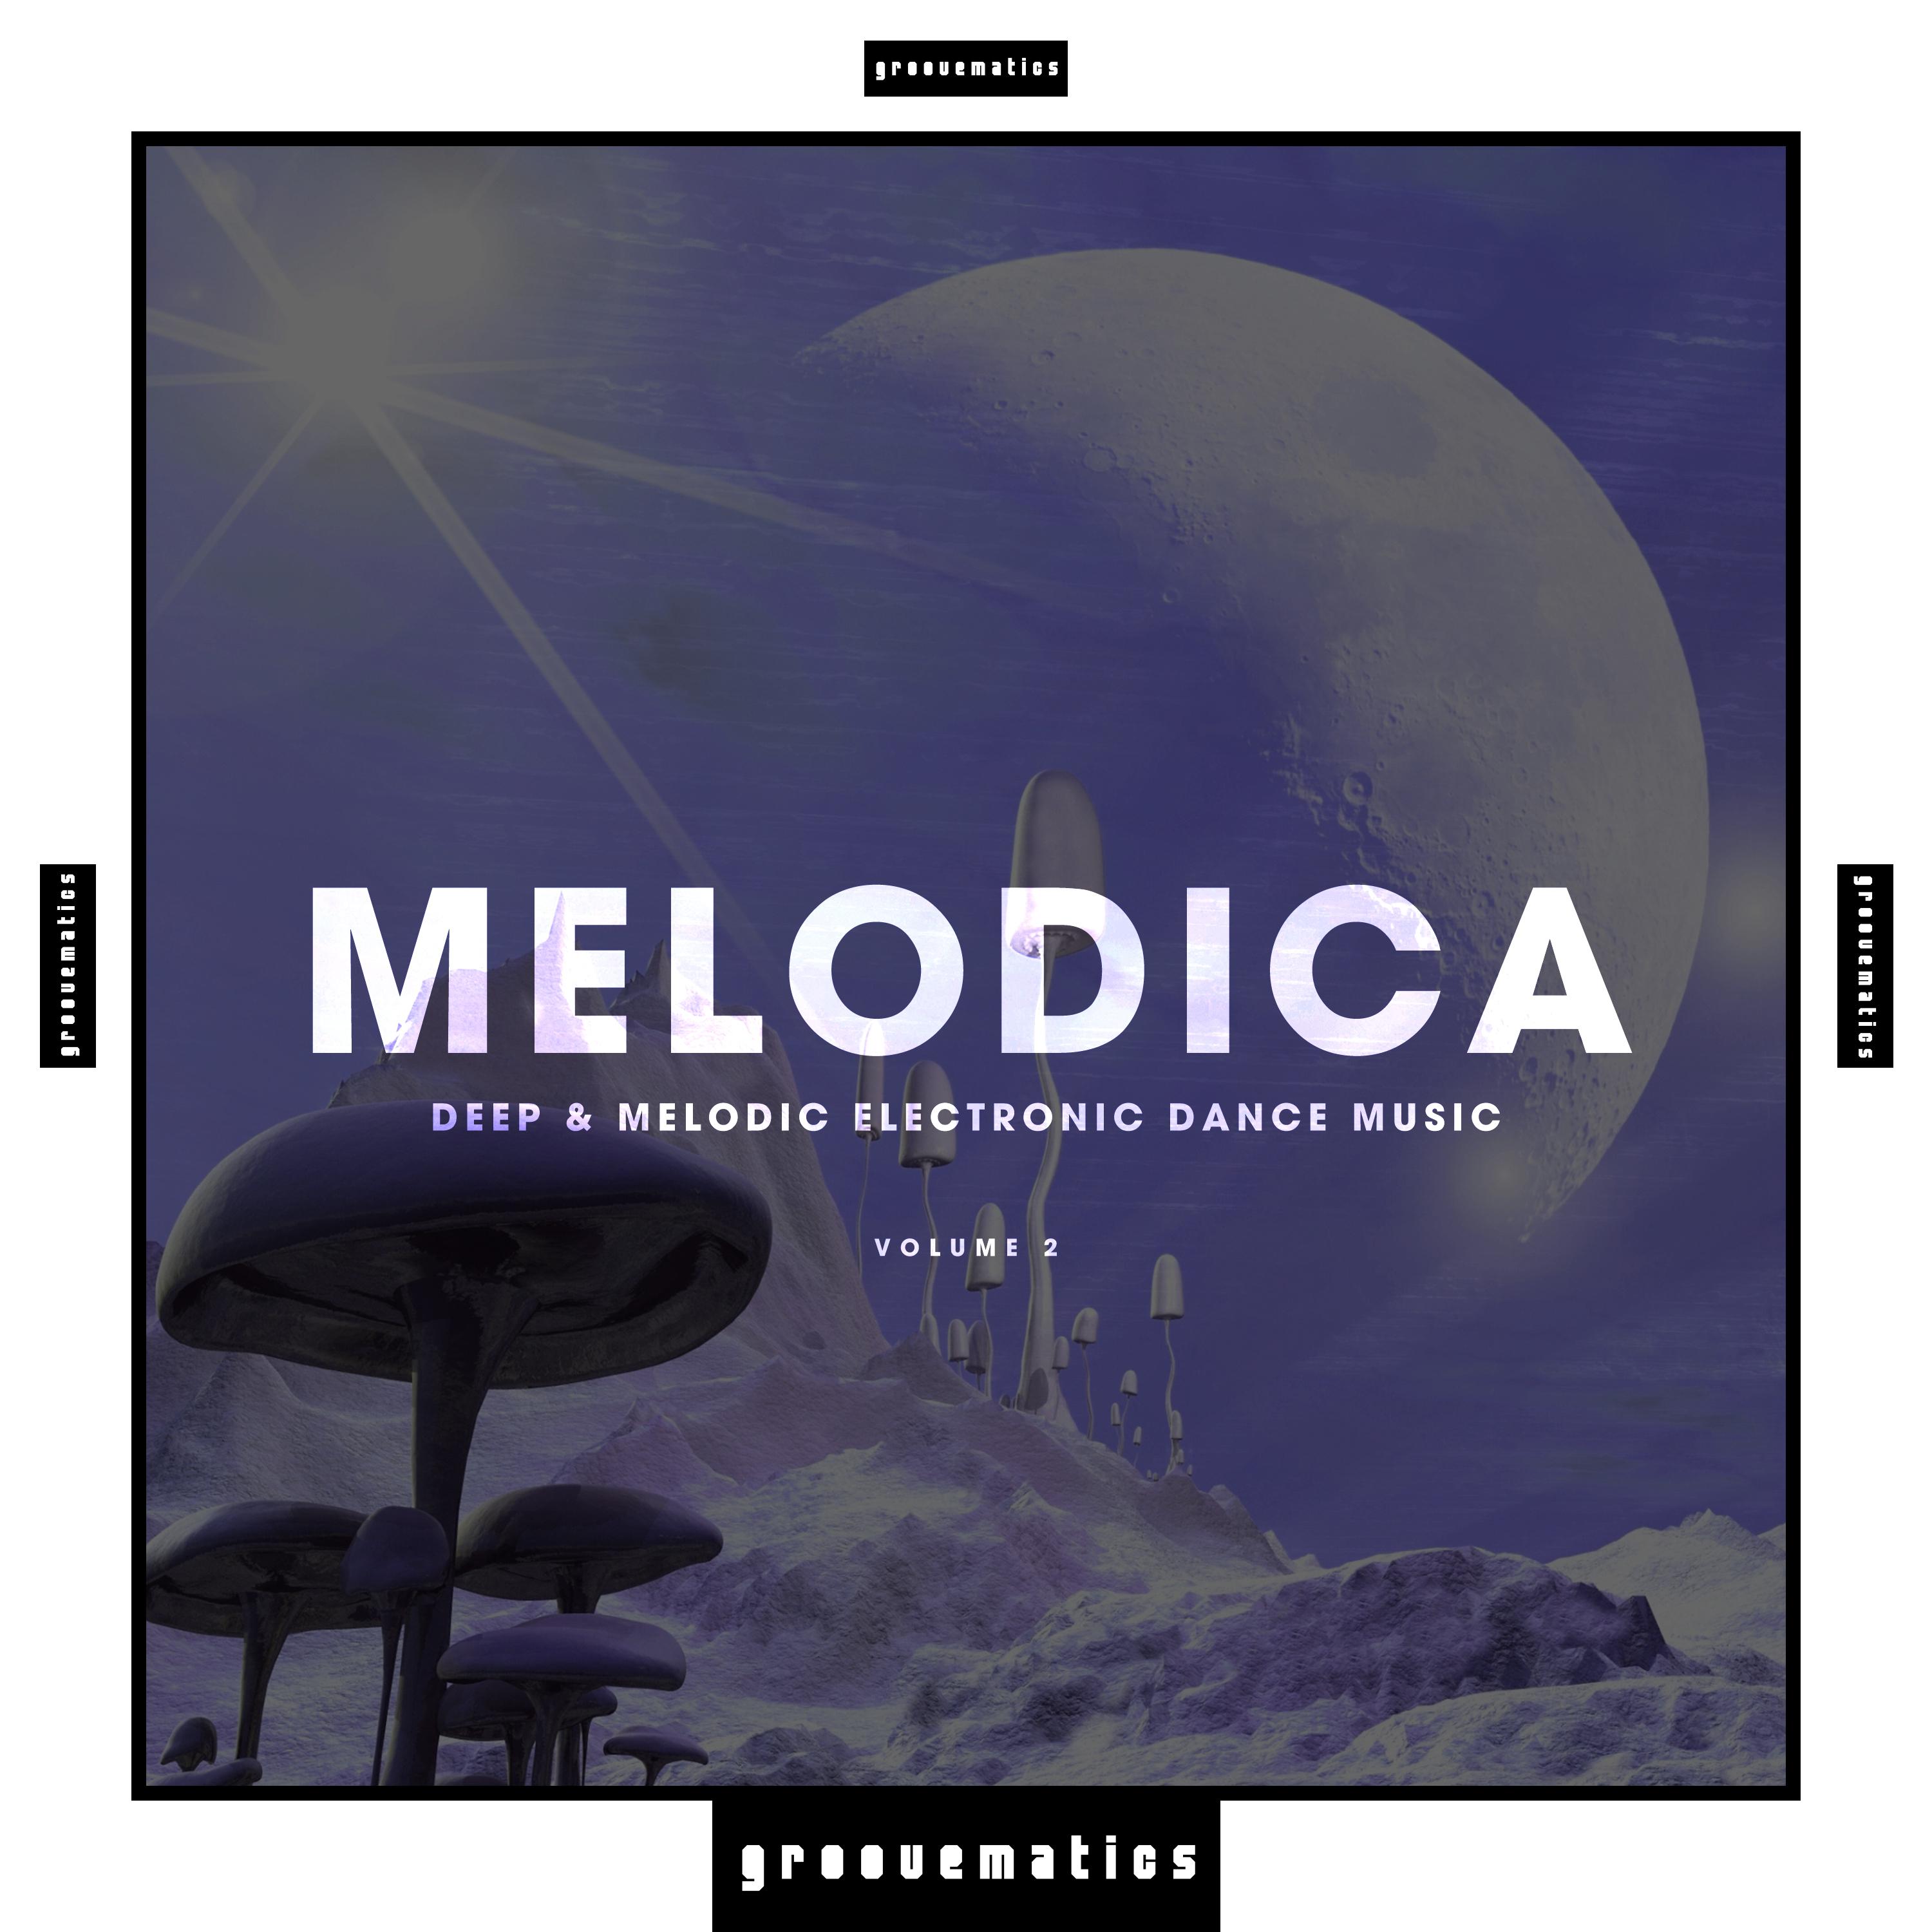 Melodica - (Deep & Melodic Electronic Dance Music), Vol. 2